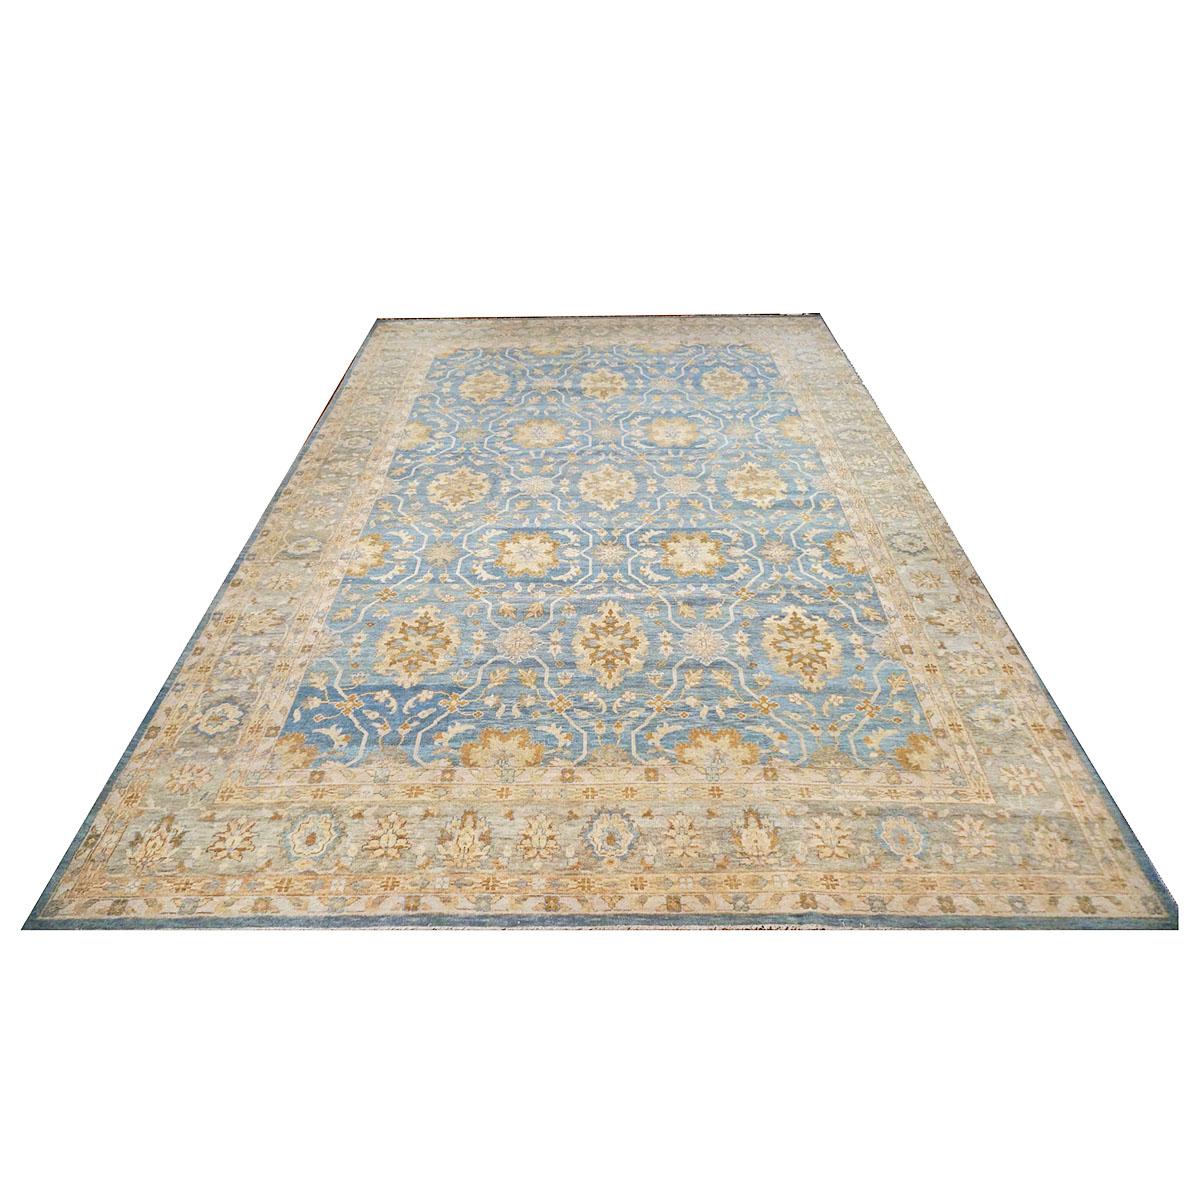 Ashly Fine Rugs presents an antique recreation of an original Persian Sultanabad 10x14 Blue & Gold Handmade Area Rug. Part of our own previous production, this antique recreation was thought of and created in-house and 100% handmade in Afghanistan